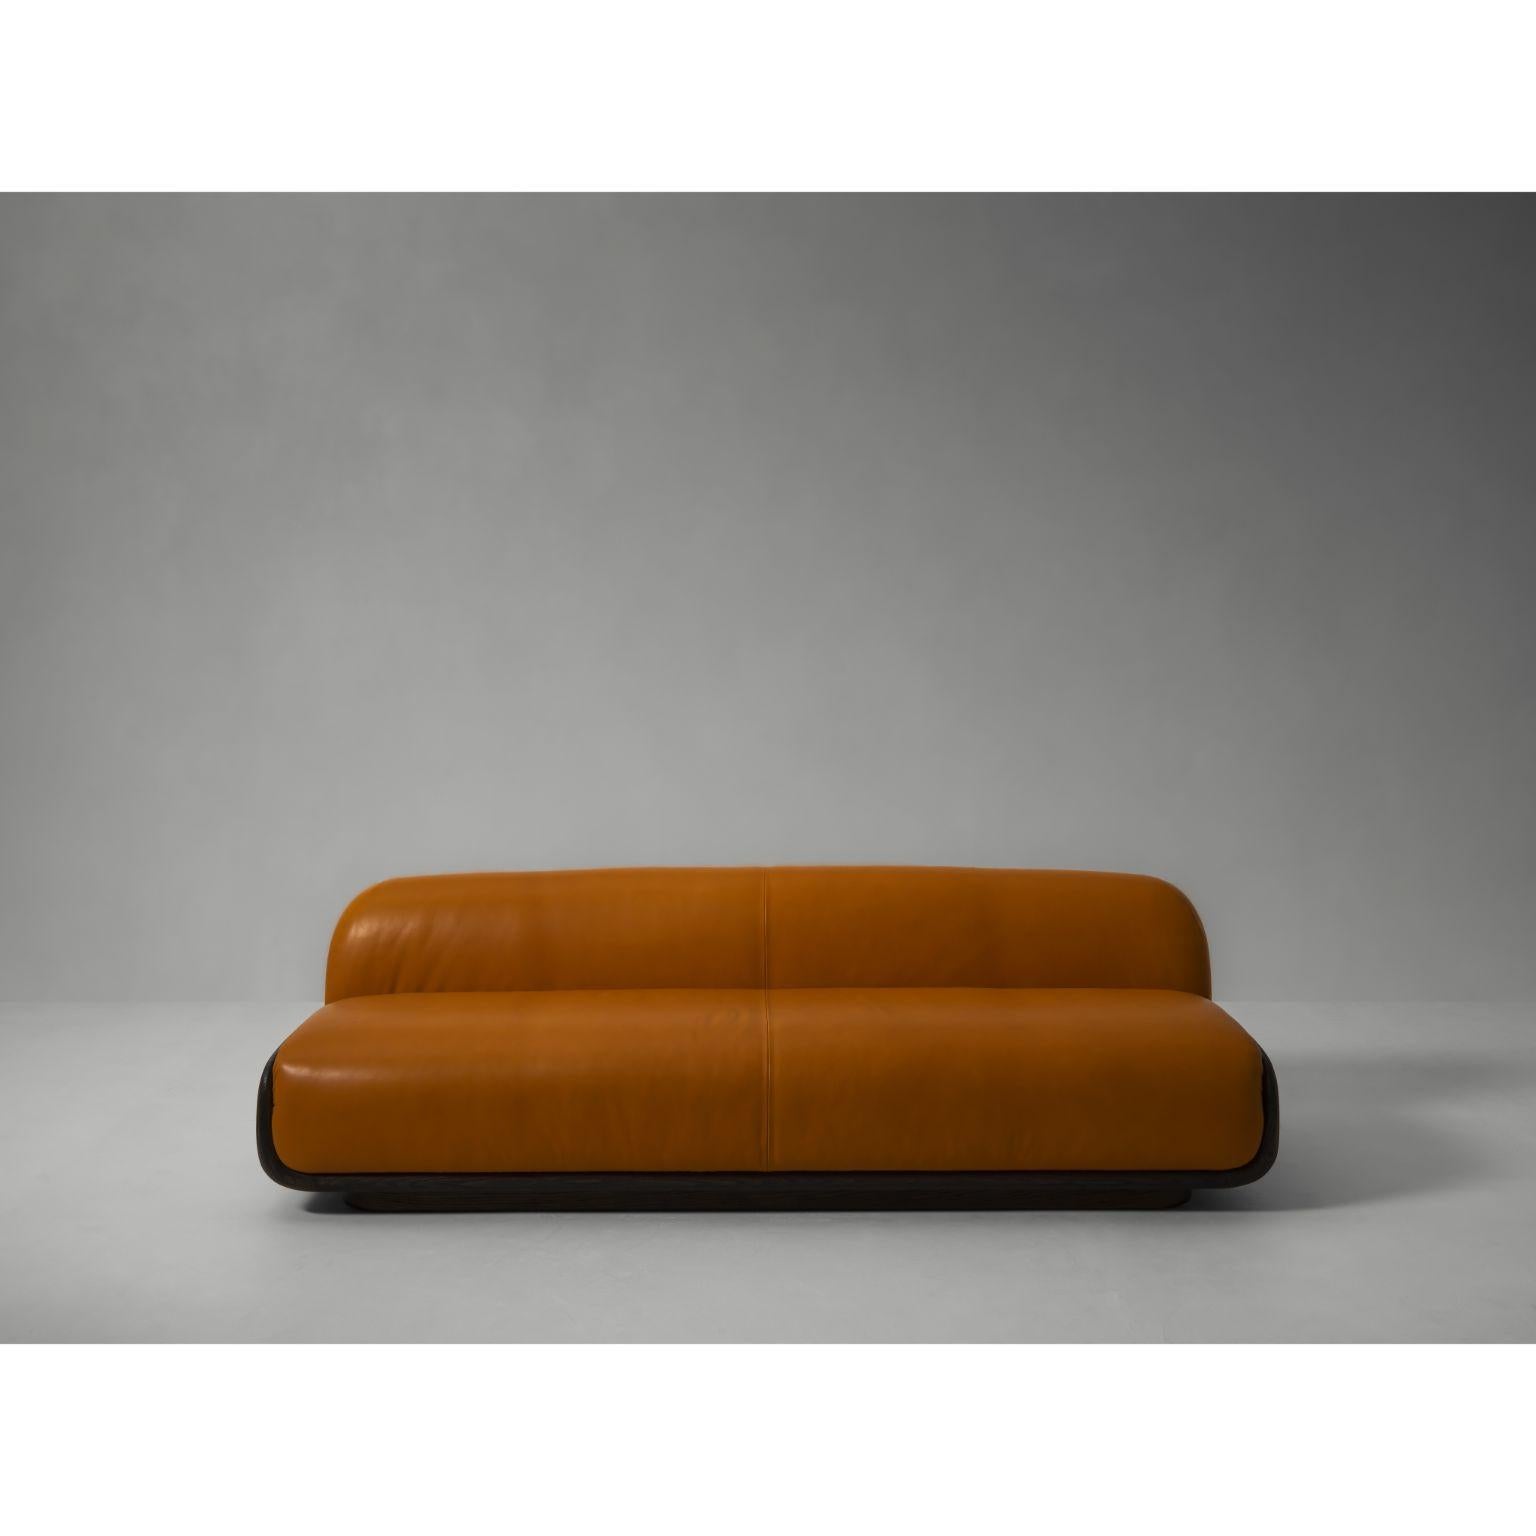 Tenere Sofa by Van Rossum
Dimensions: D 290 x W 80 x H 68 cm
Materials: Oak, Upholstery, Leather

A generous three-seat sofa with a wooden frame and pillowy, organically shaped upholstered cushions. Available in French oak, and with your preferred